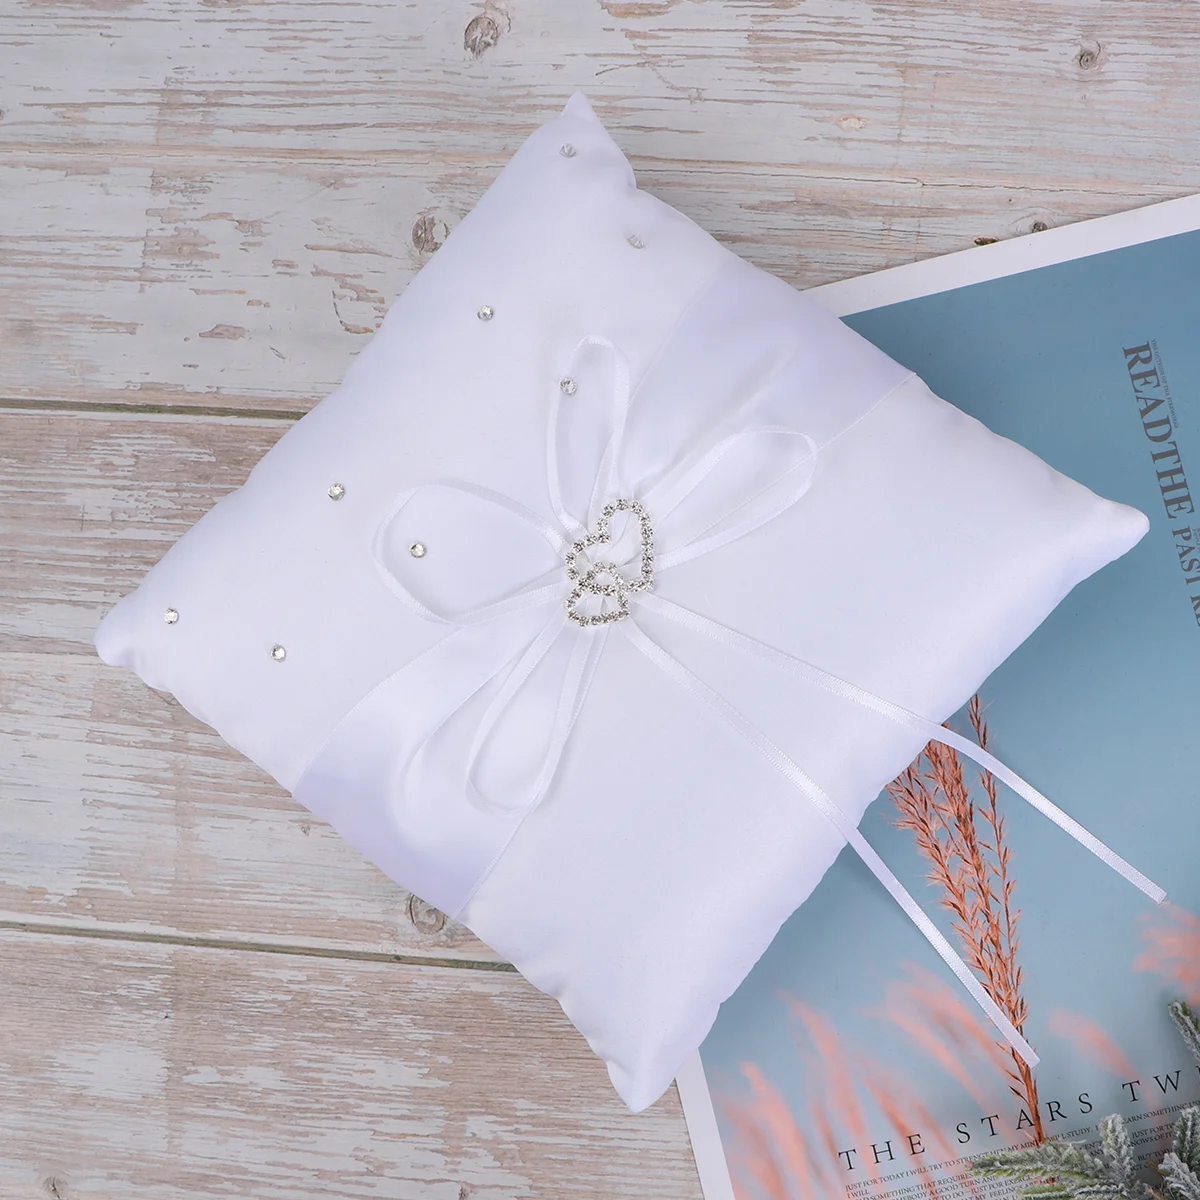 

20*20cm Double Heart Bridal Wedding Ceremony Pocket Ring Bearer Pillow Cushion with Satin Ribbons (White)